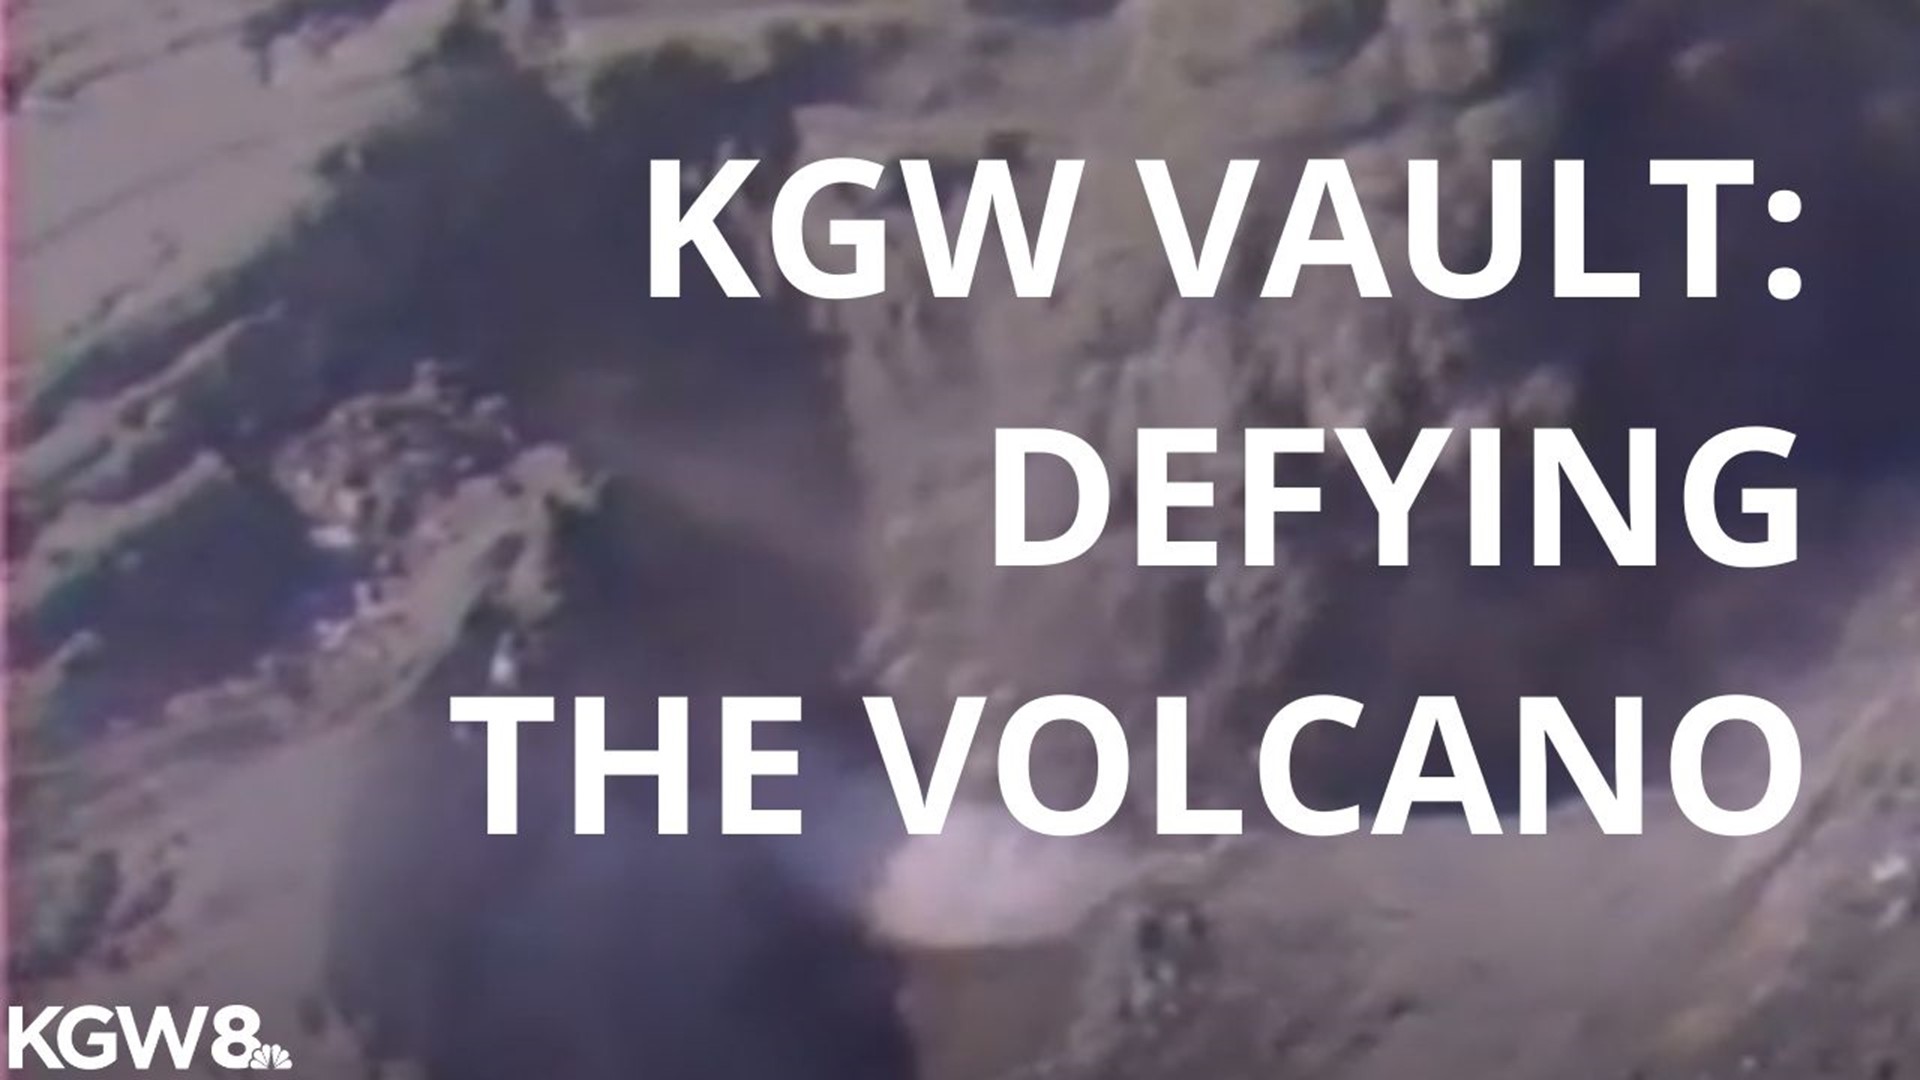 In the KGW Vault we found some folks who didn't think the mountain was anything to be afraid of. Turns out there definitely was something to be afraid of.